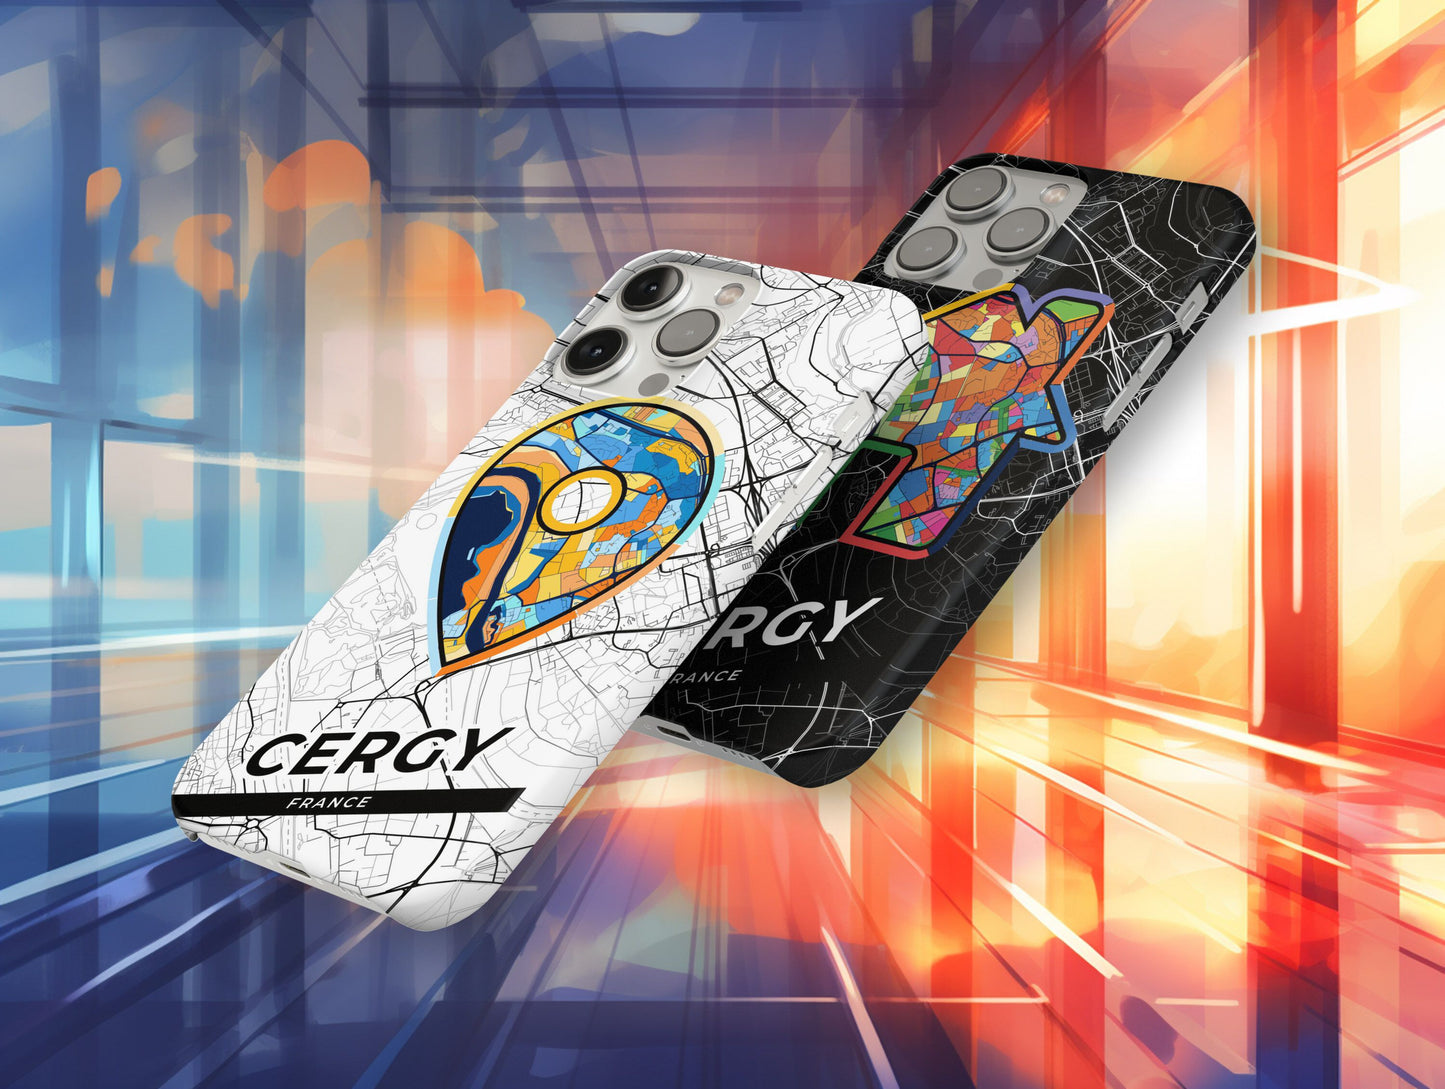 Cergy France slim phone case with colorful icon. Birthday, wedding or housewarming gift. Couple match cases.